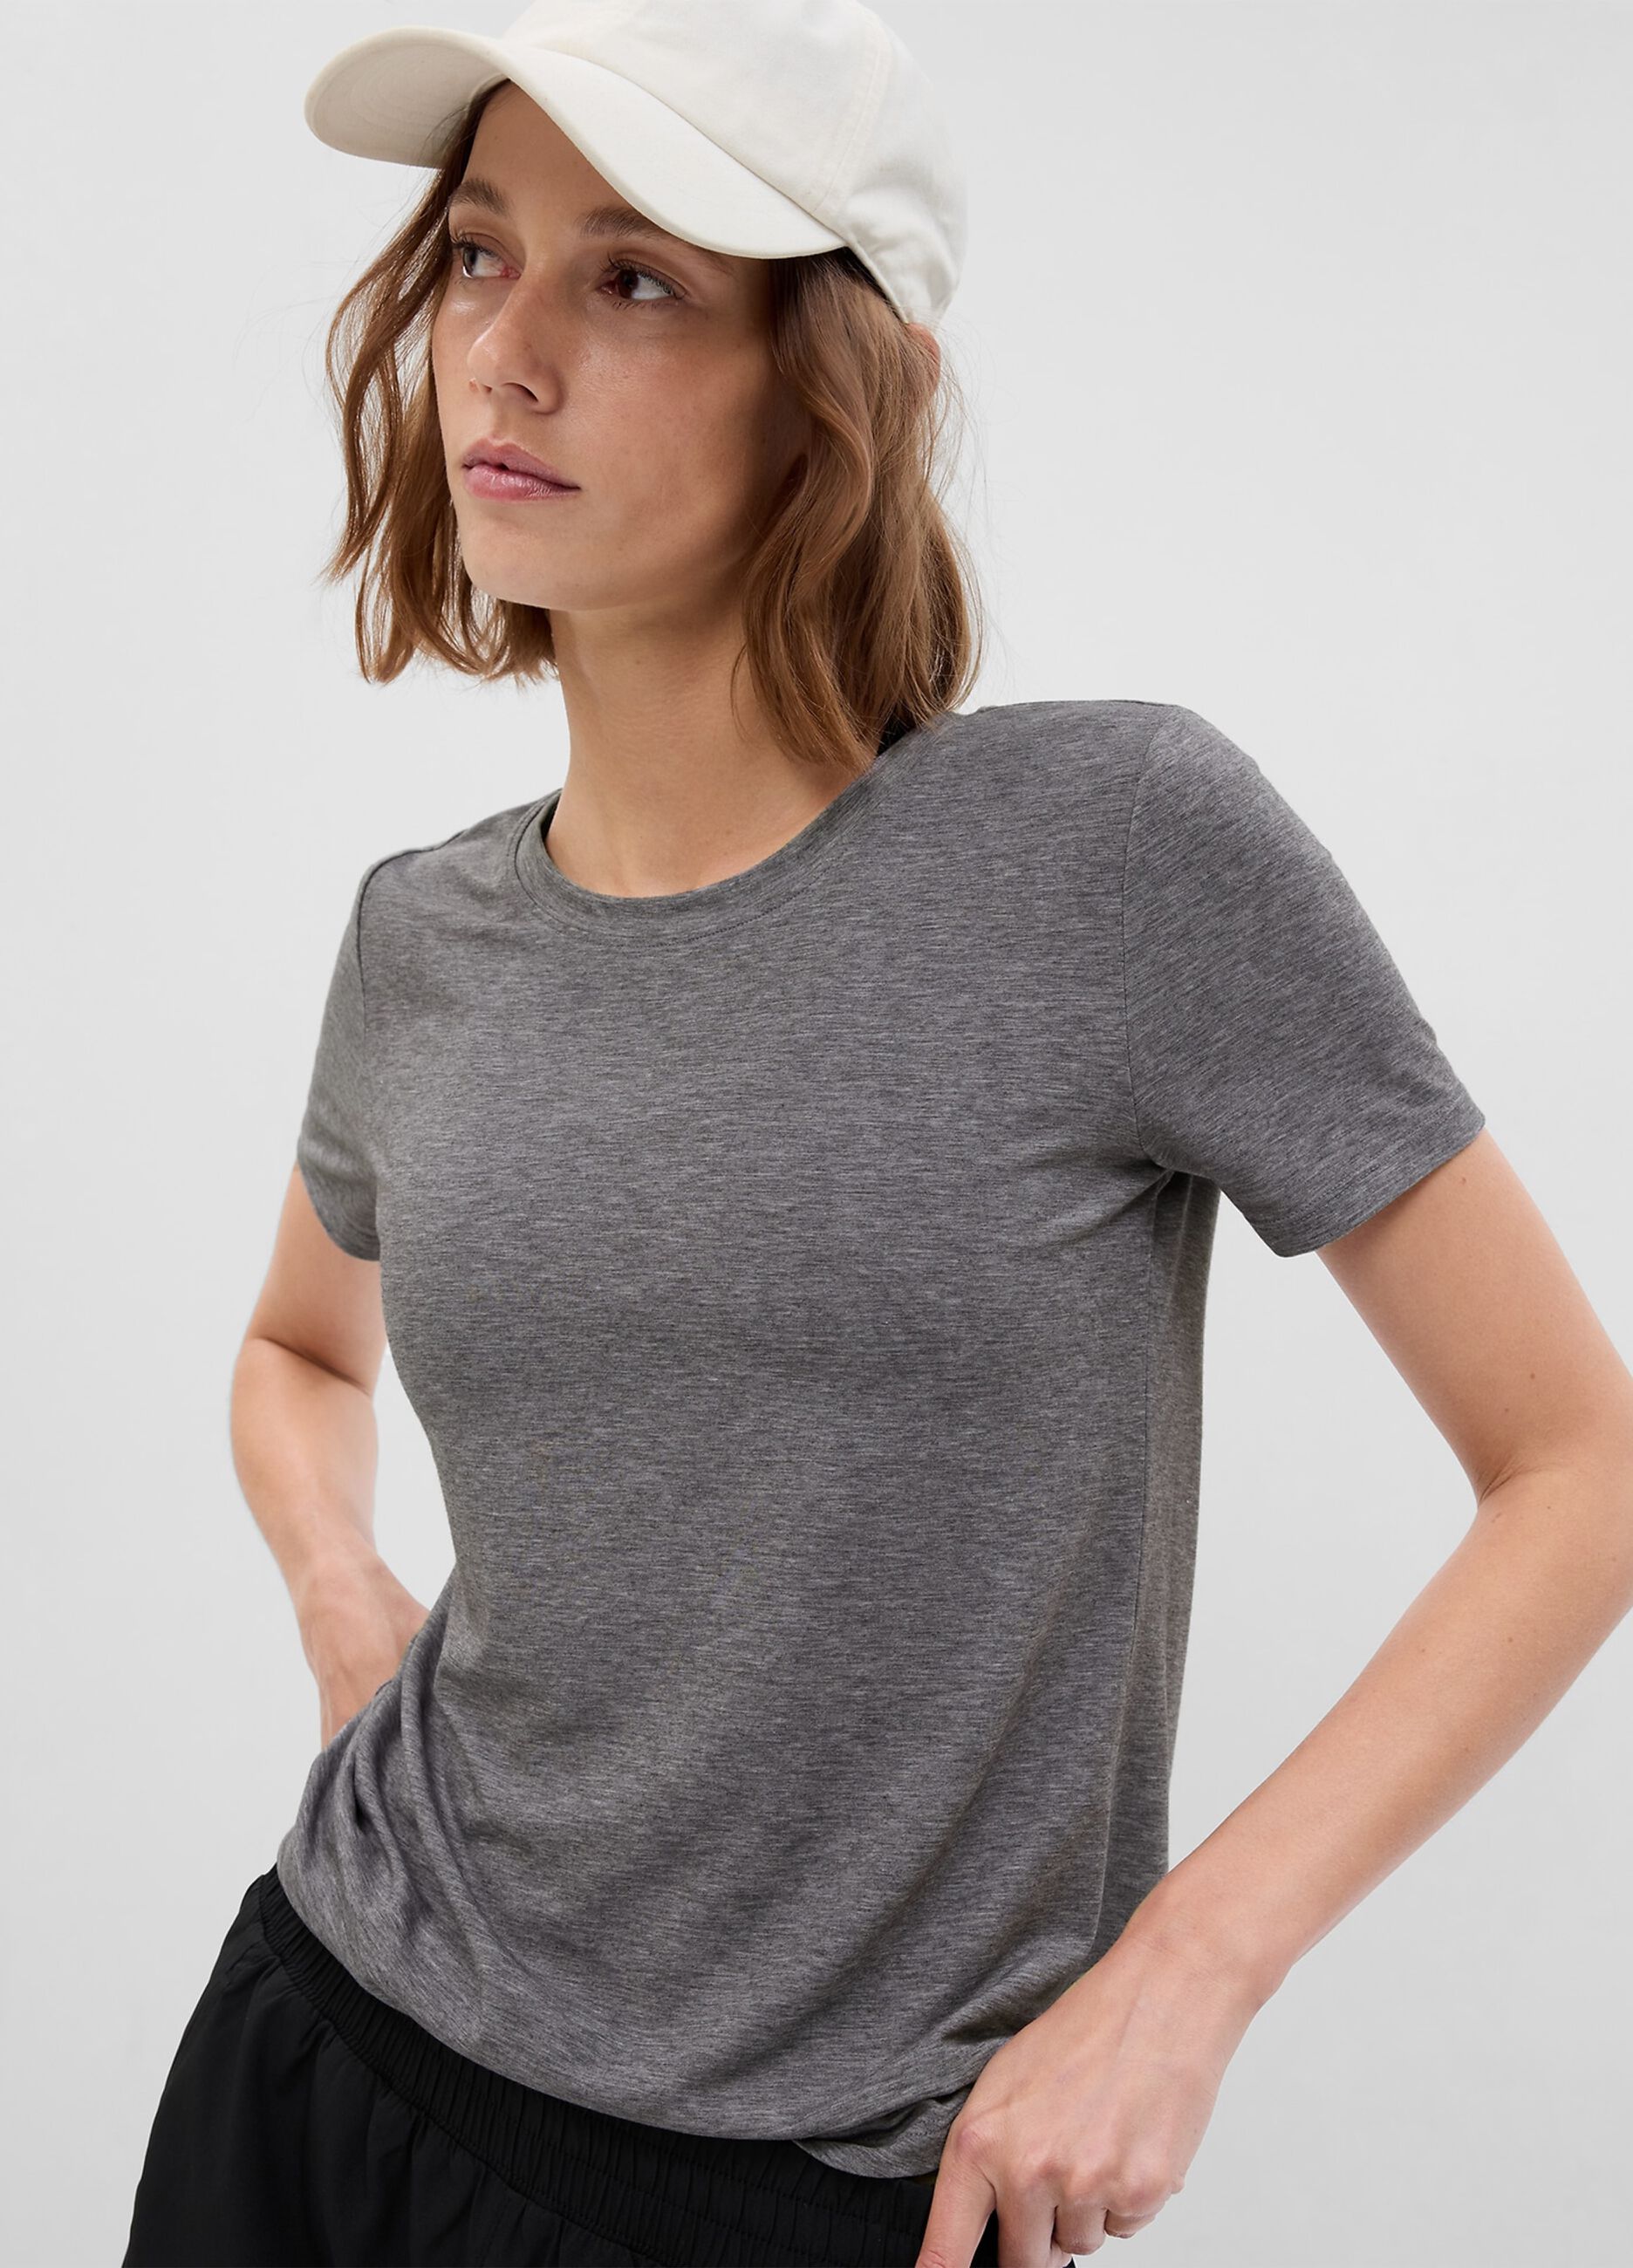 T-shirt in breathable fabric